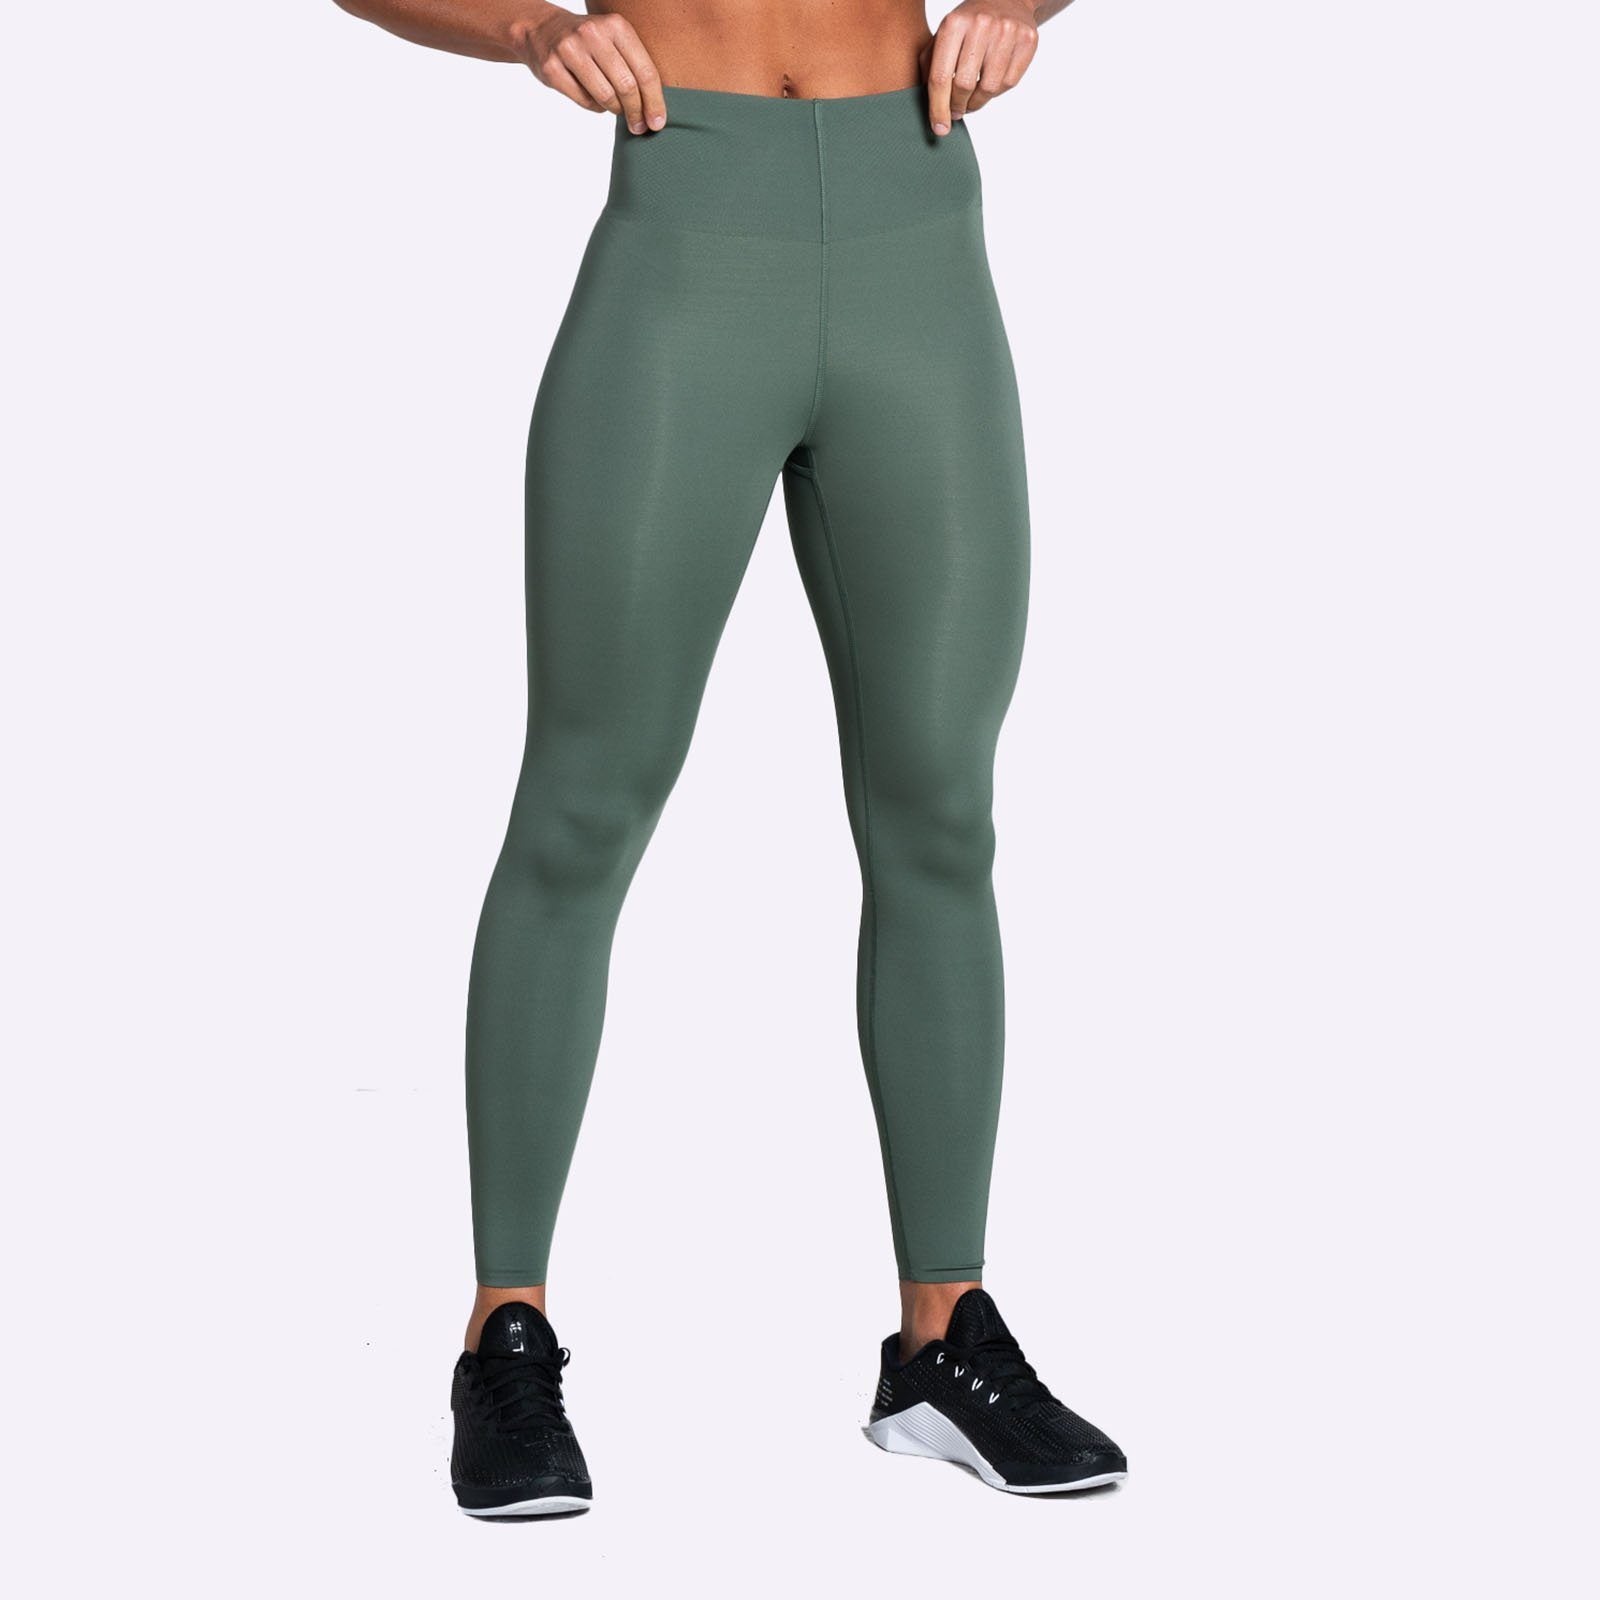 Nike Womens Sculpt Lux Training Tights XL 7/8 High Rise MINT Cj4135 097 for  sale online